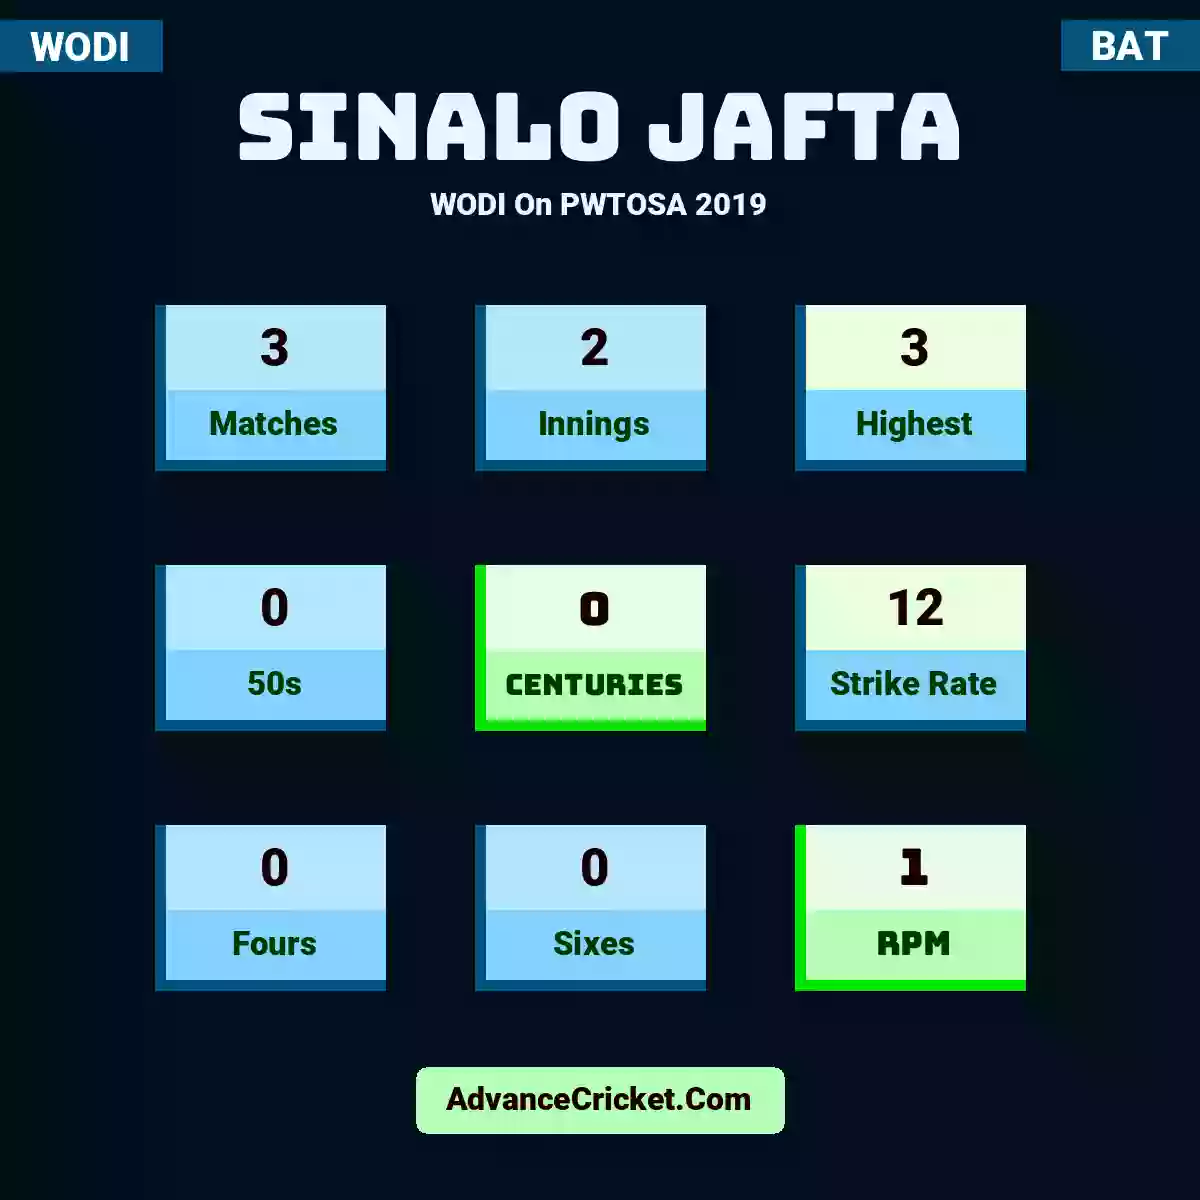 Sinalo Jafta WODI  On PWTOSA 2019, Sinalo Jafta played 3 matches, scored 3 runs as highest, 0 half-centuries, and 0 centuries, with a strike rate of 12. S.Jafta hit 0 fours and 0 sixes, with an RPM of 1.